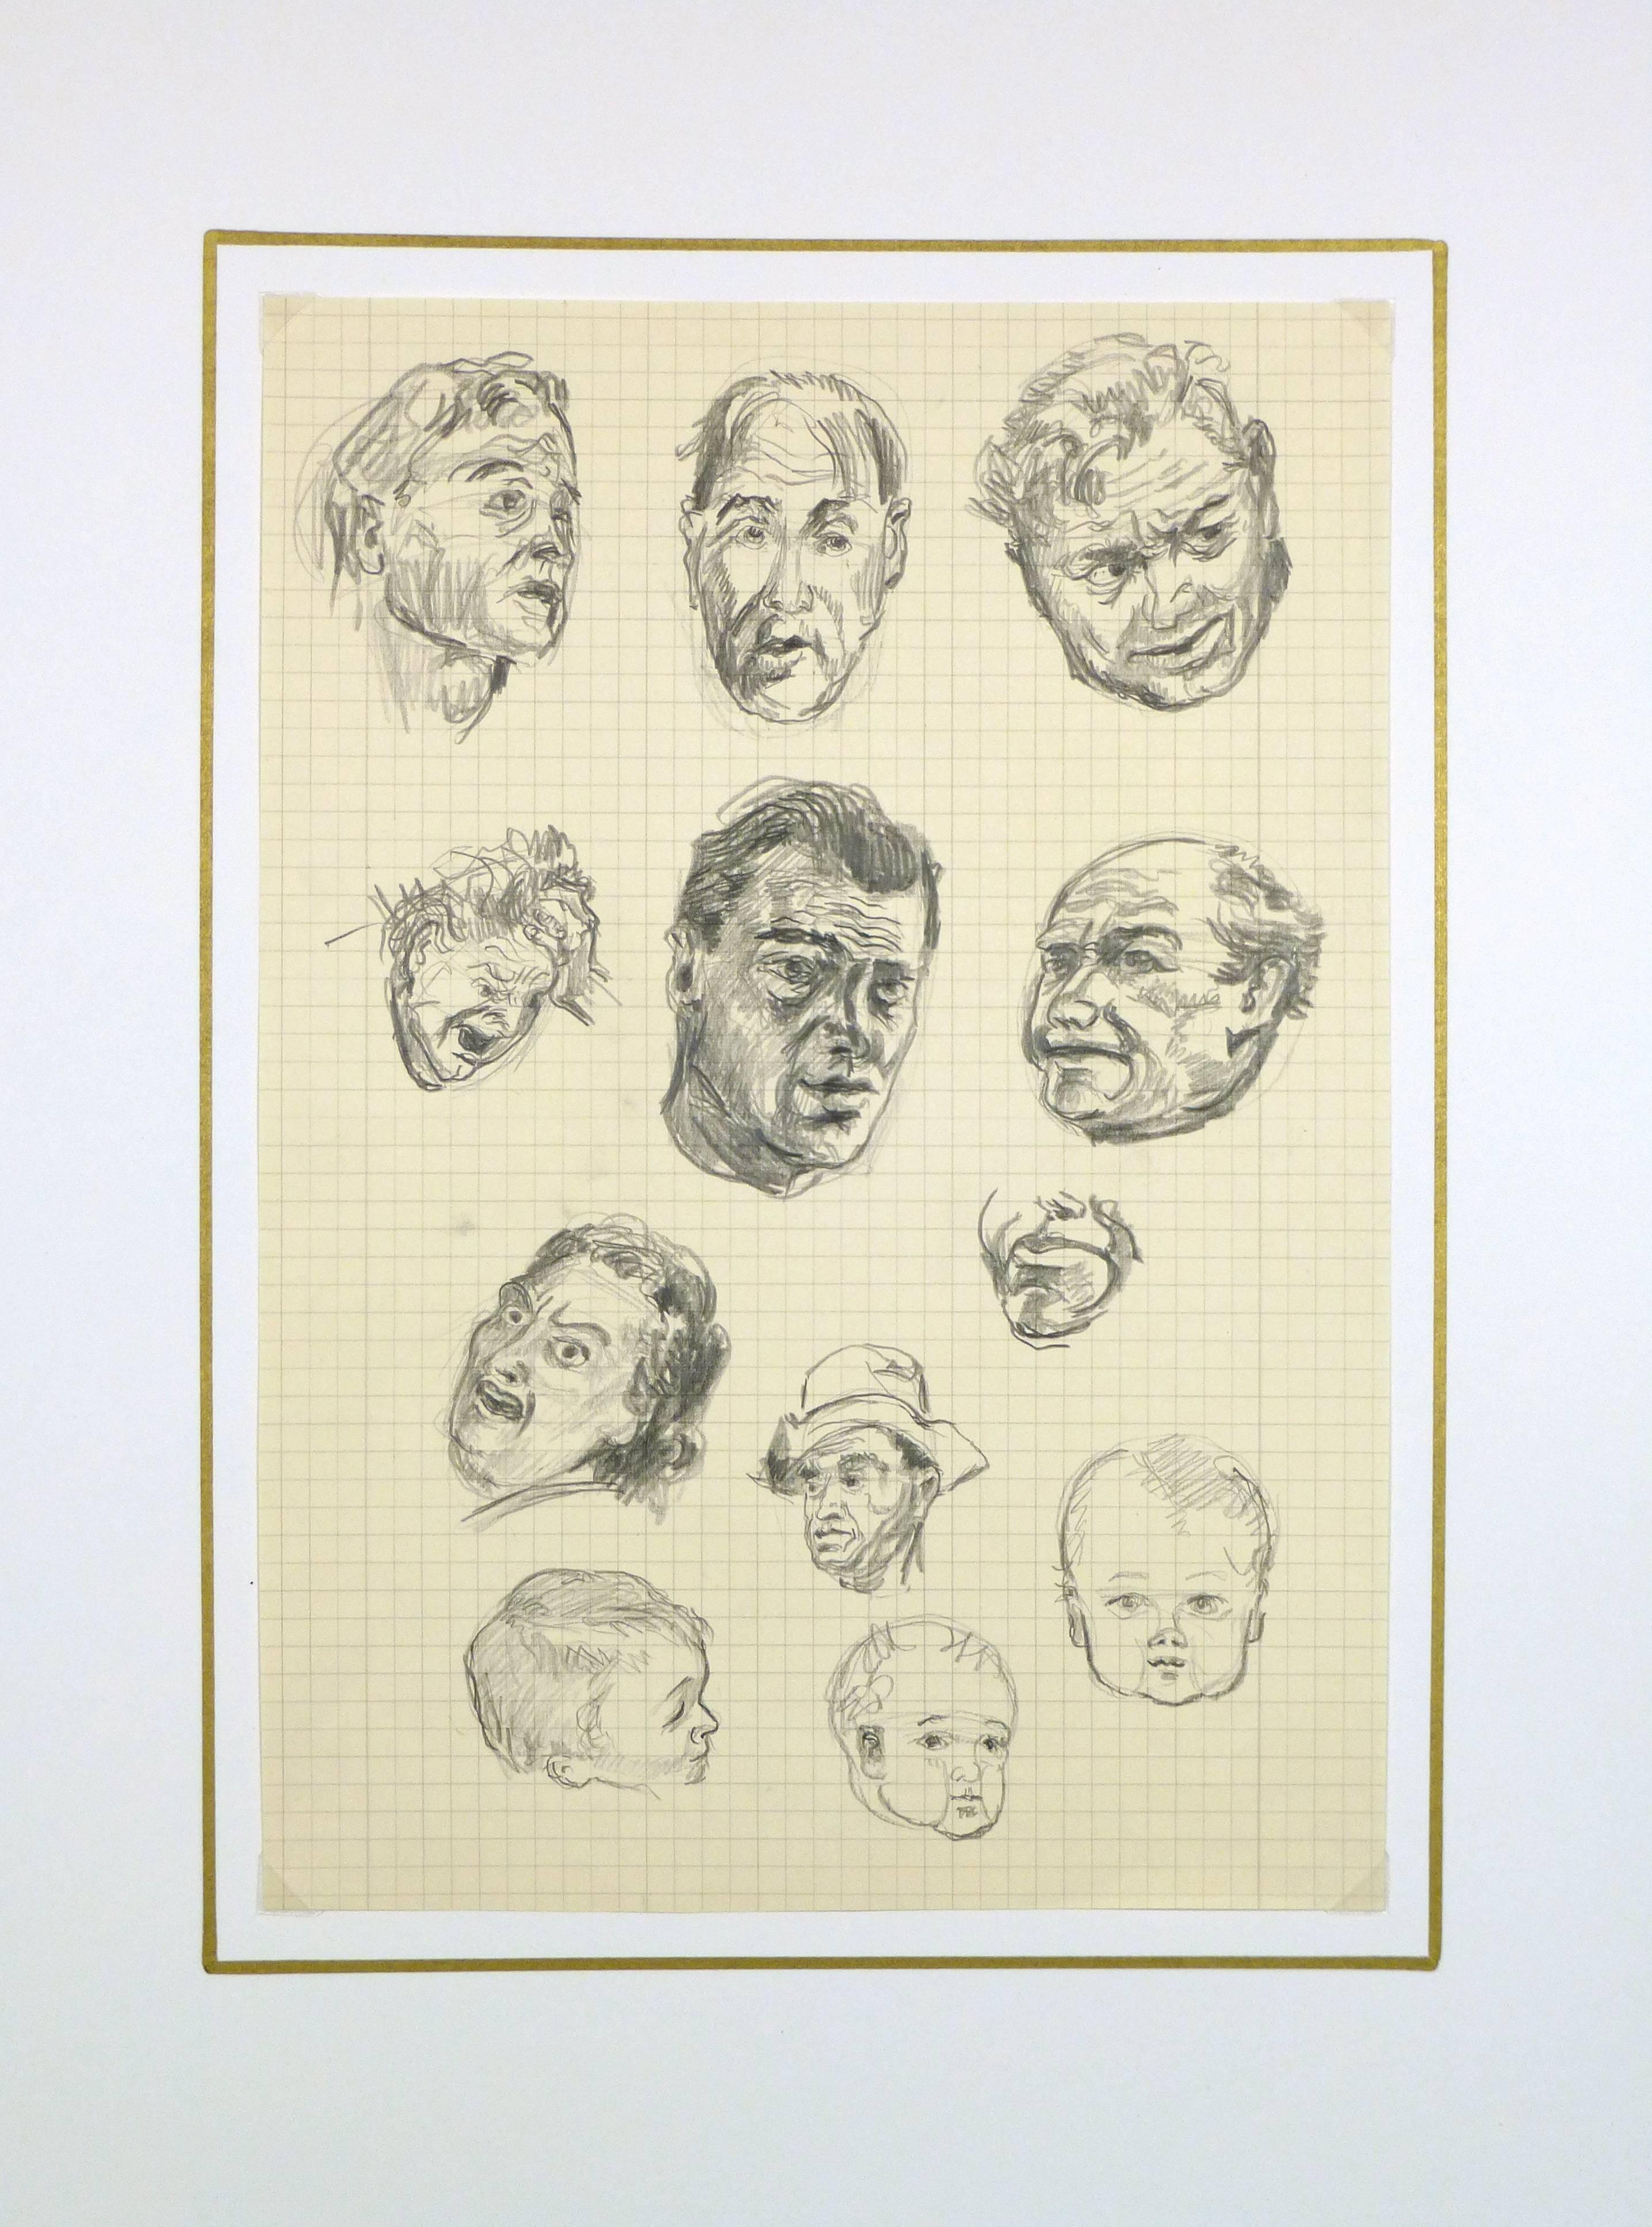 Creative pencil drawing of facial expressions by German artist and illustrator Werner Bell, 1964.

Original artwork on paper displayed on a white mat with a gold border. Mat fits a standard-sized frame. Archival plastic sleeve and Certificate of